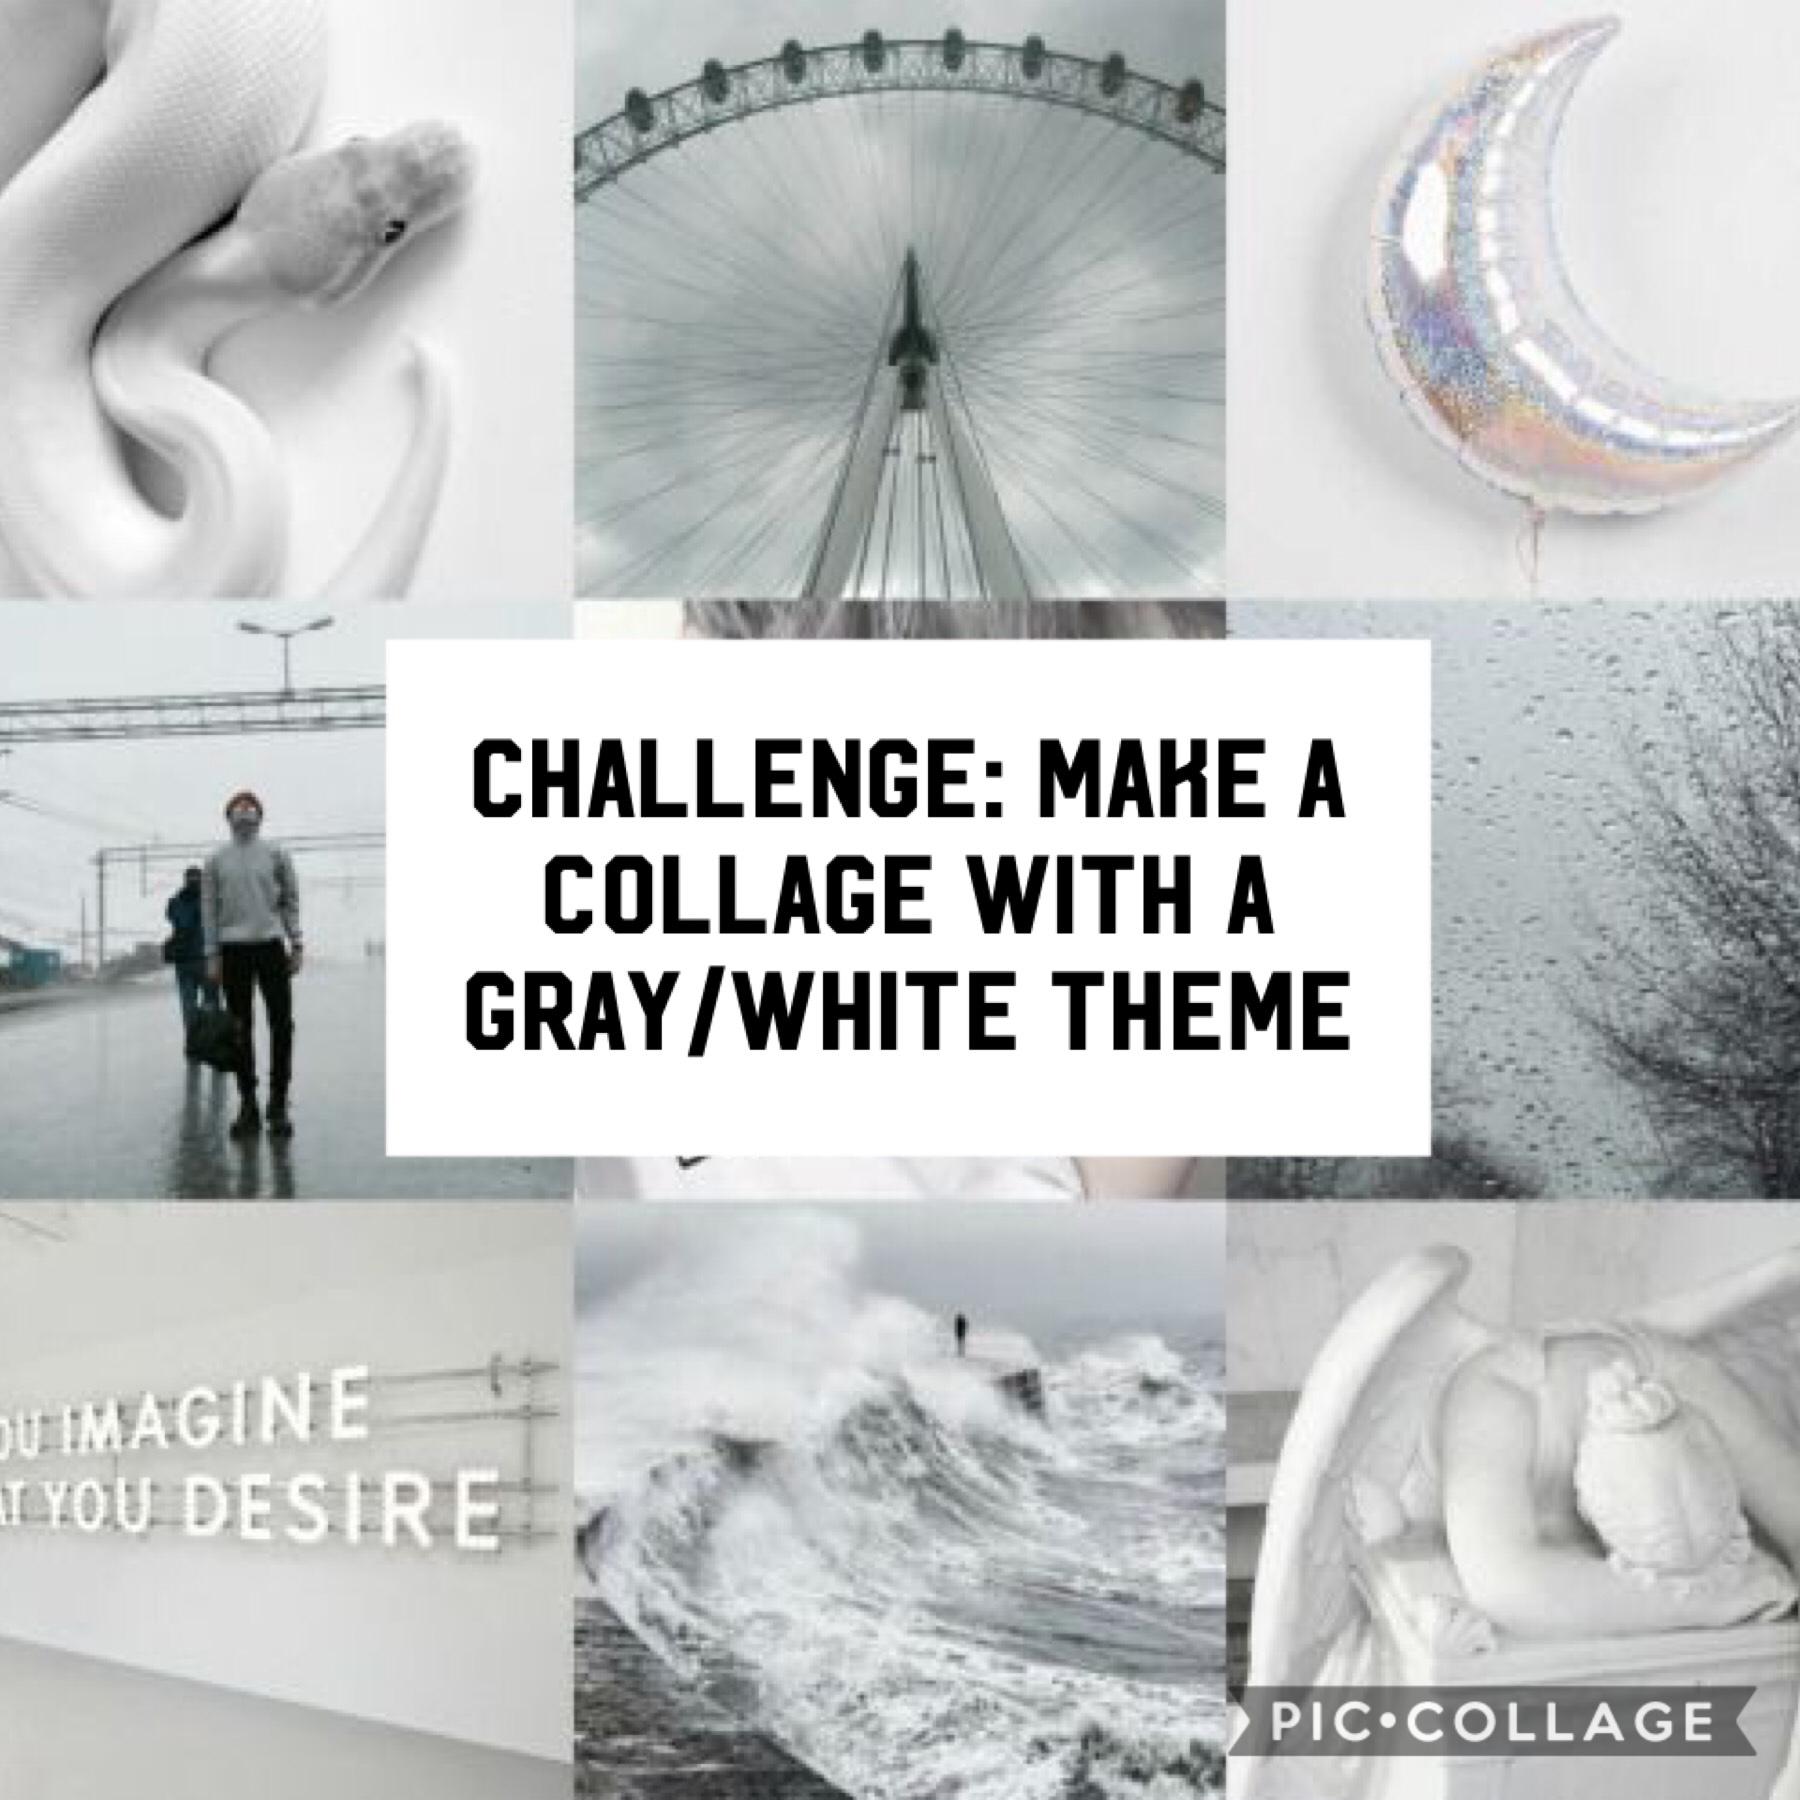 Contest for... white/grey collage